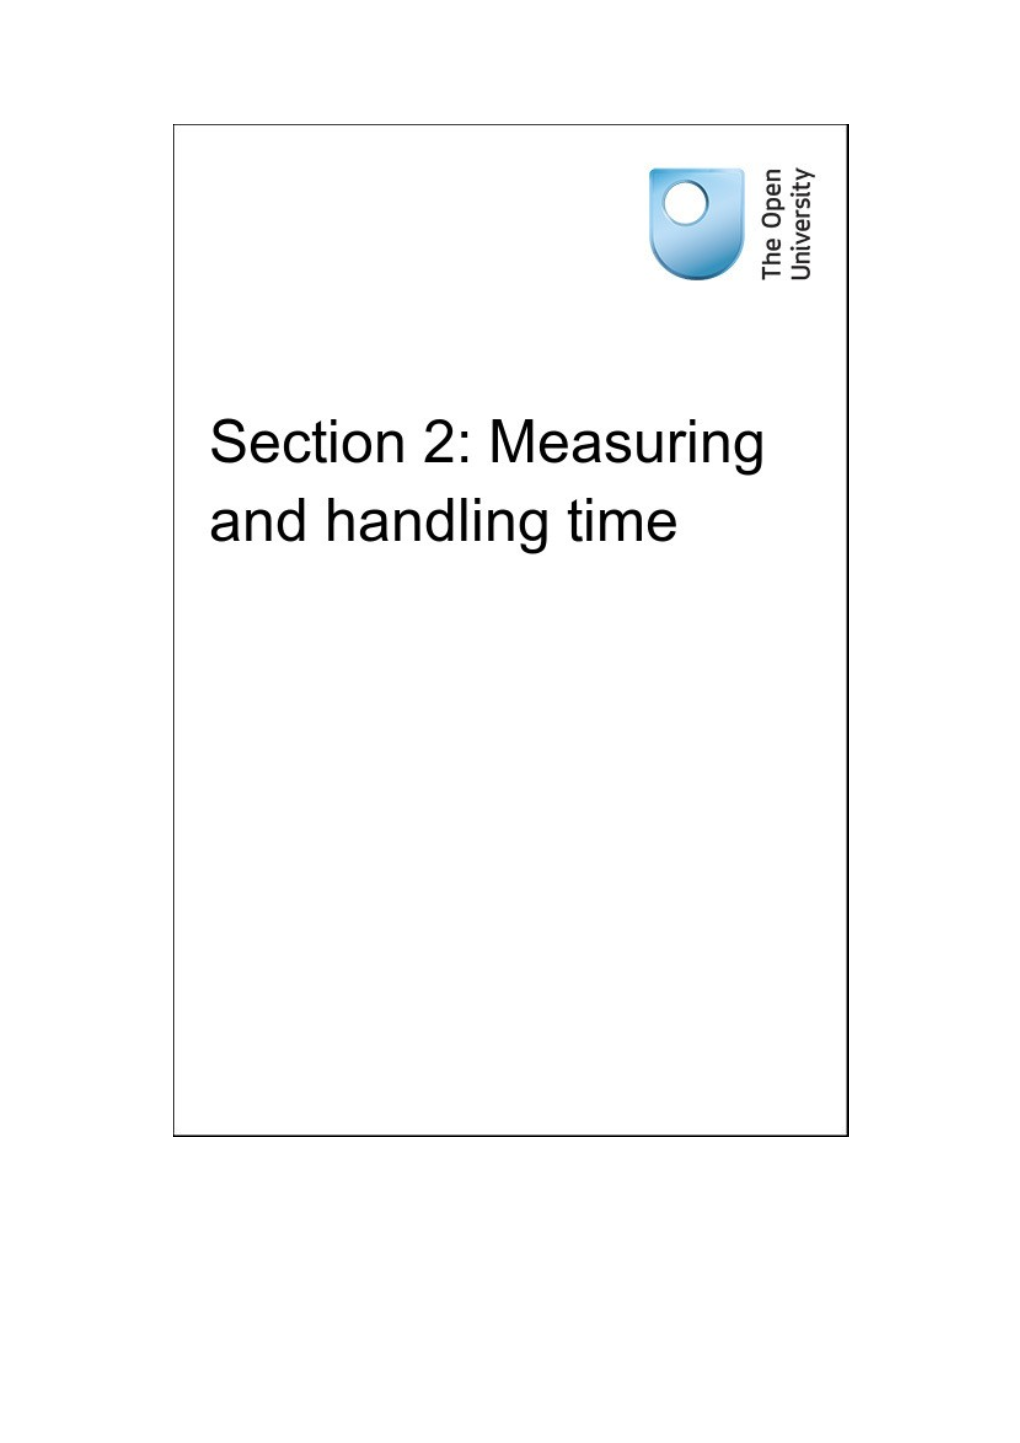 Section 2: Measuring and Handling Time